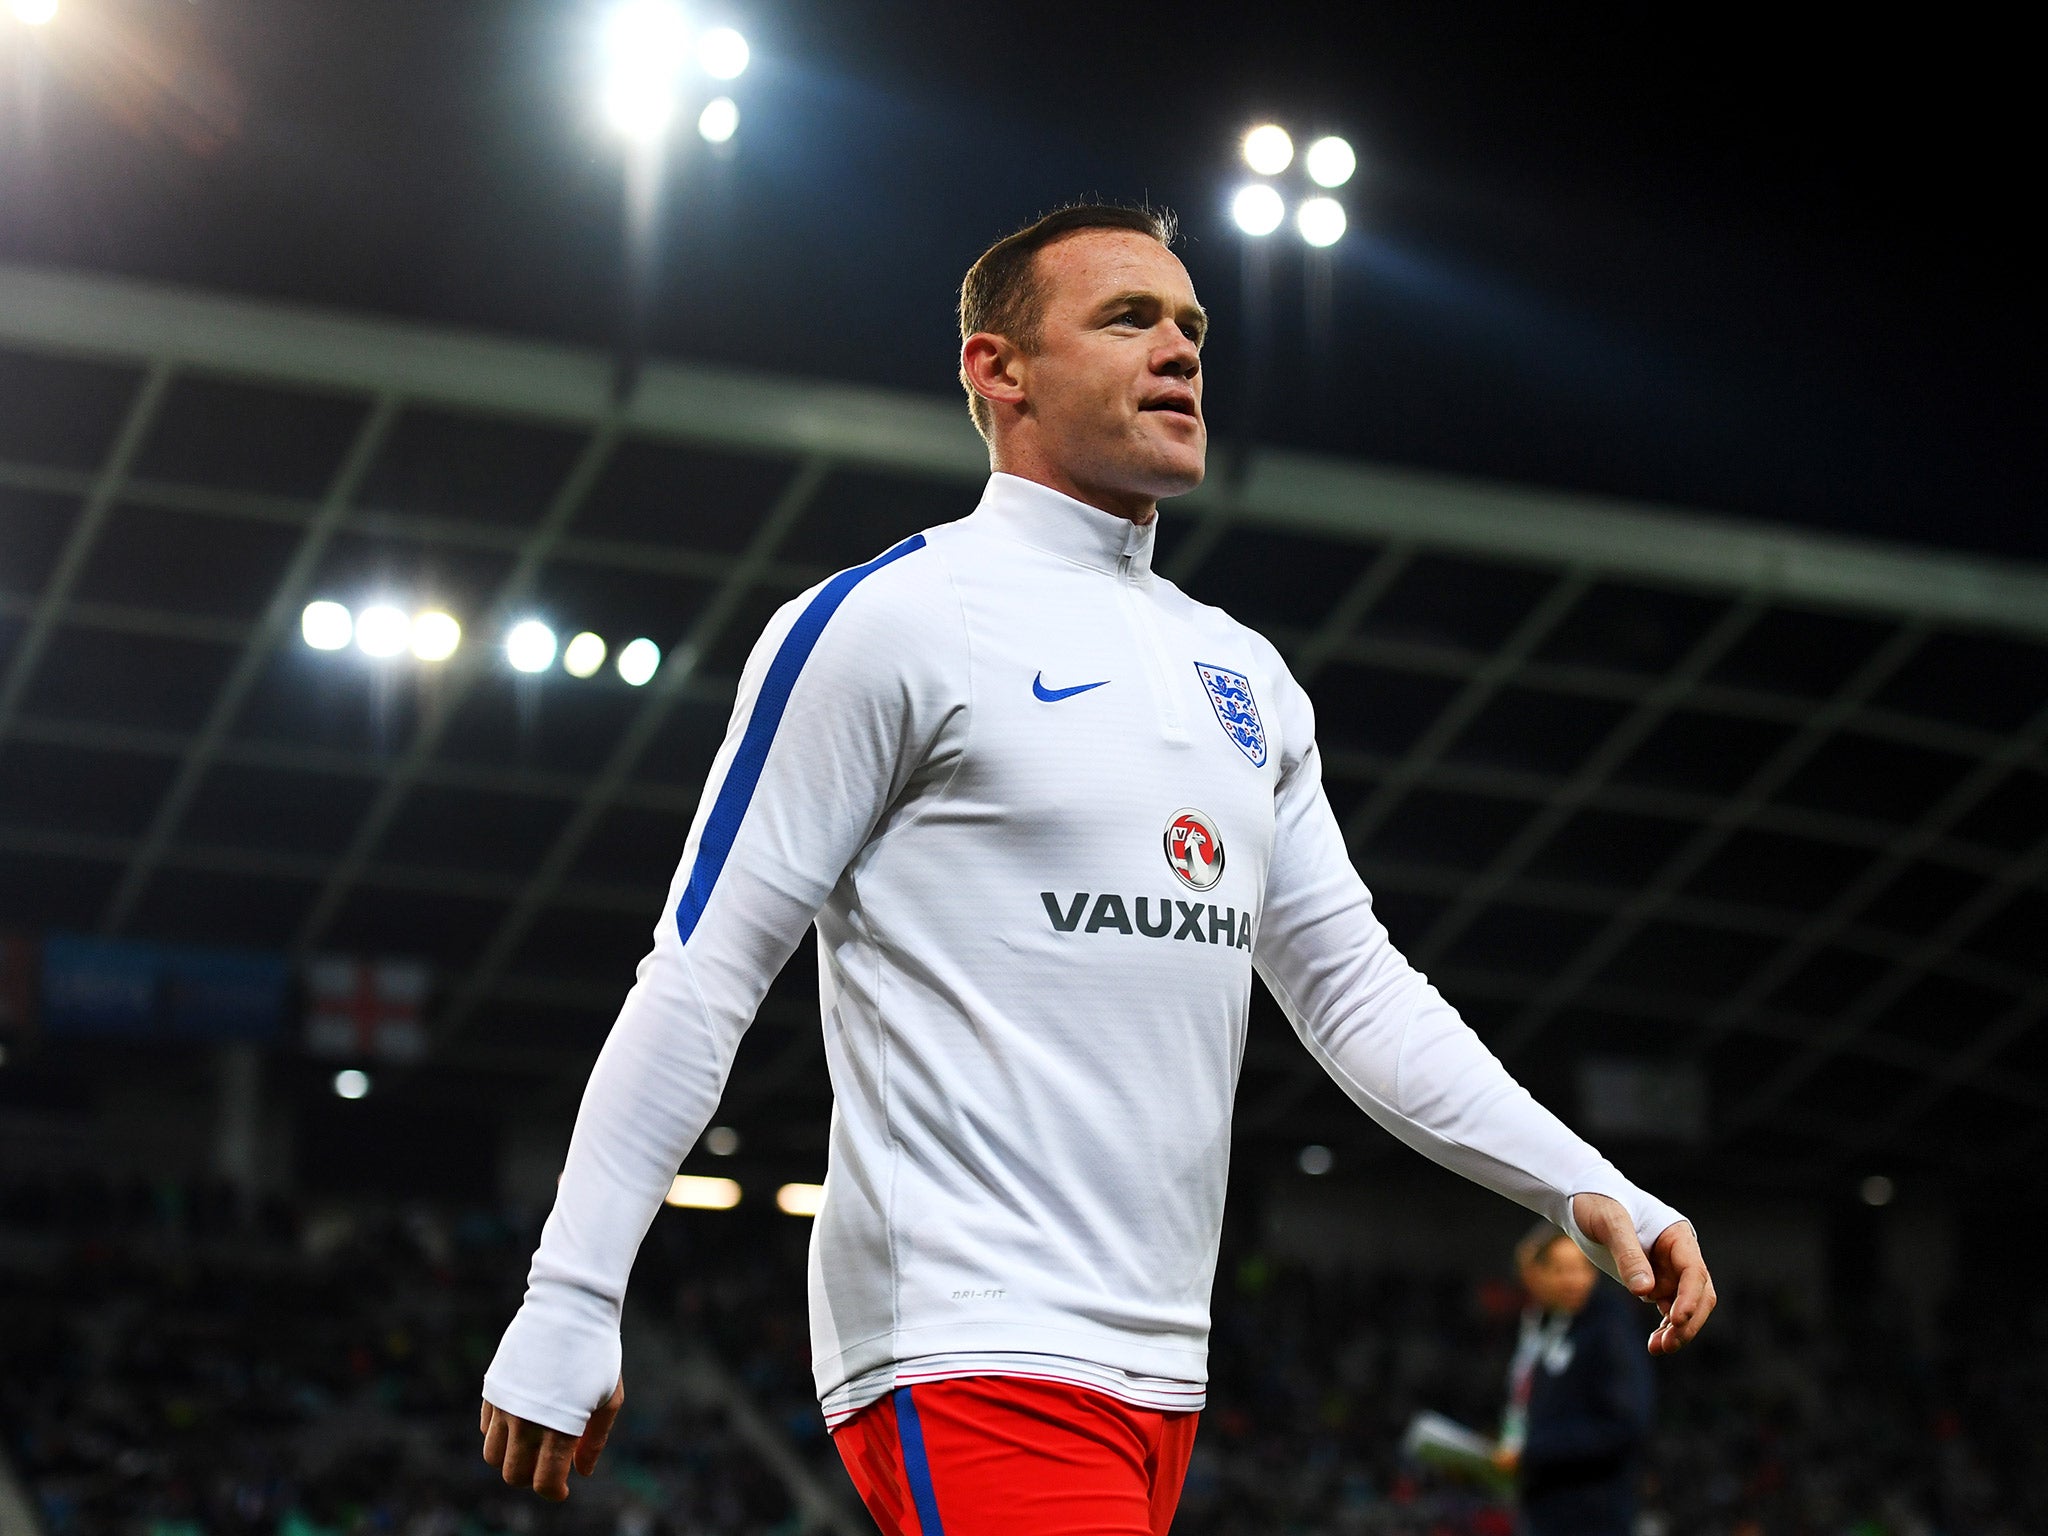 Wayne Rooney will not be dropped by England manager Gareth Southgate